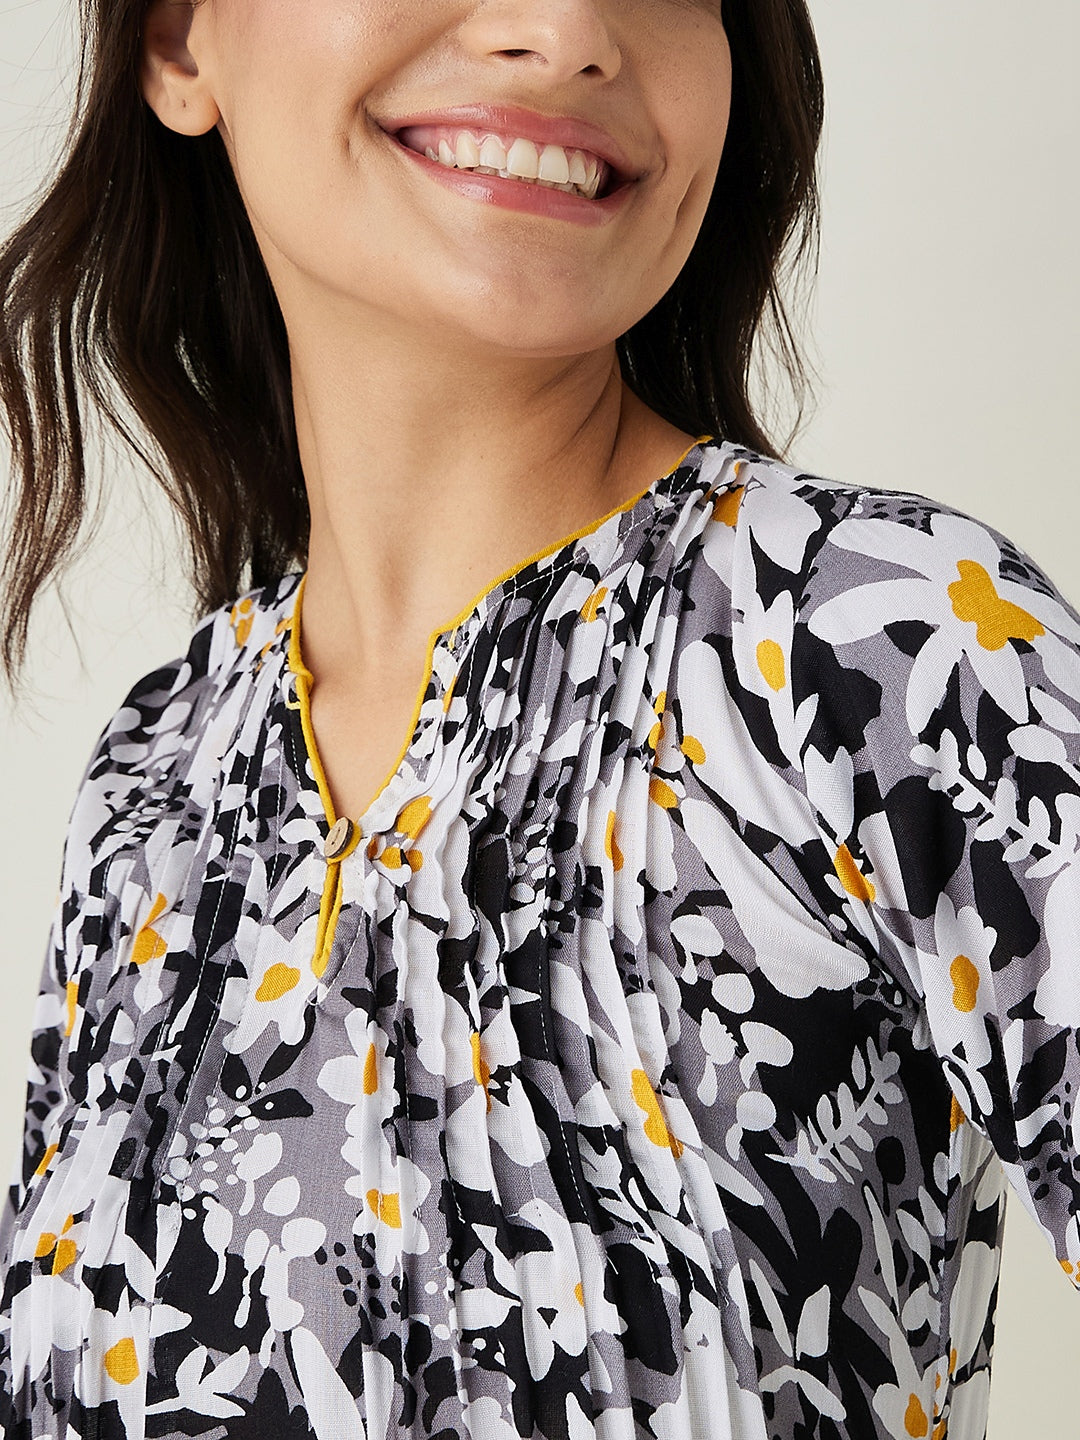 Women's Black and White Floral Printed Nightdress - The Kaftan Company